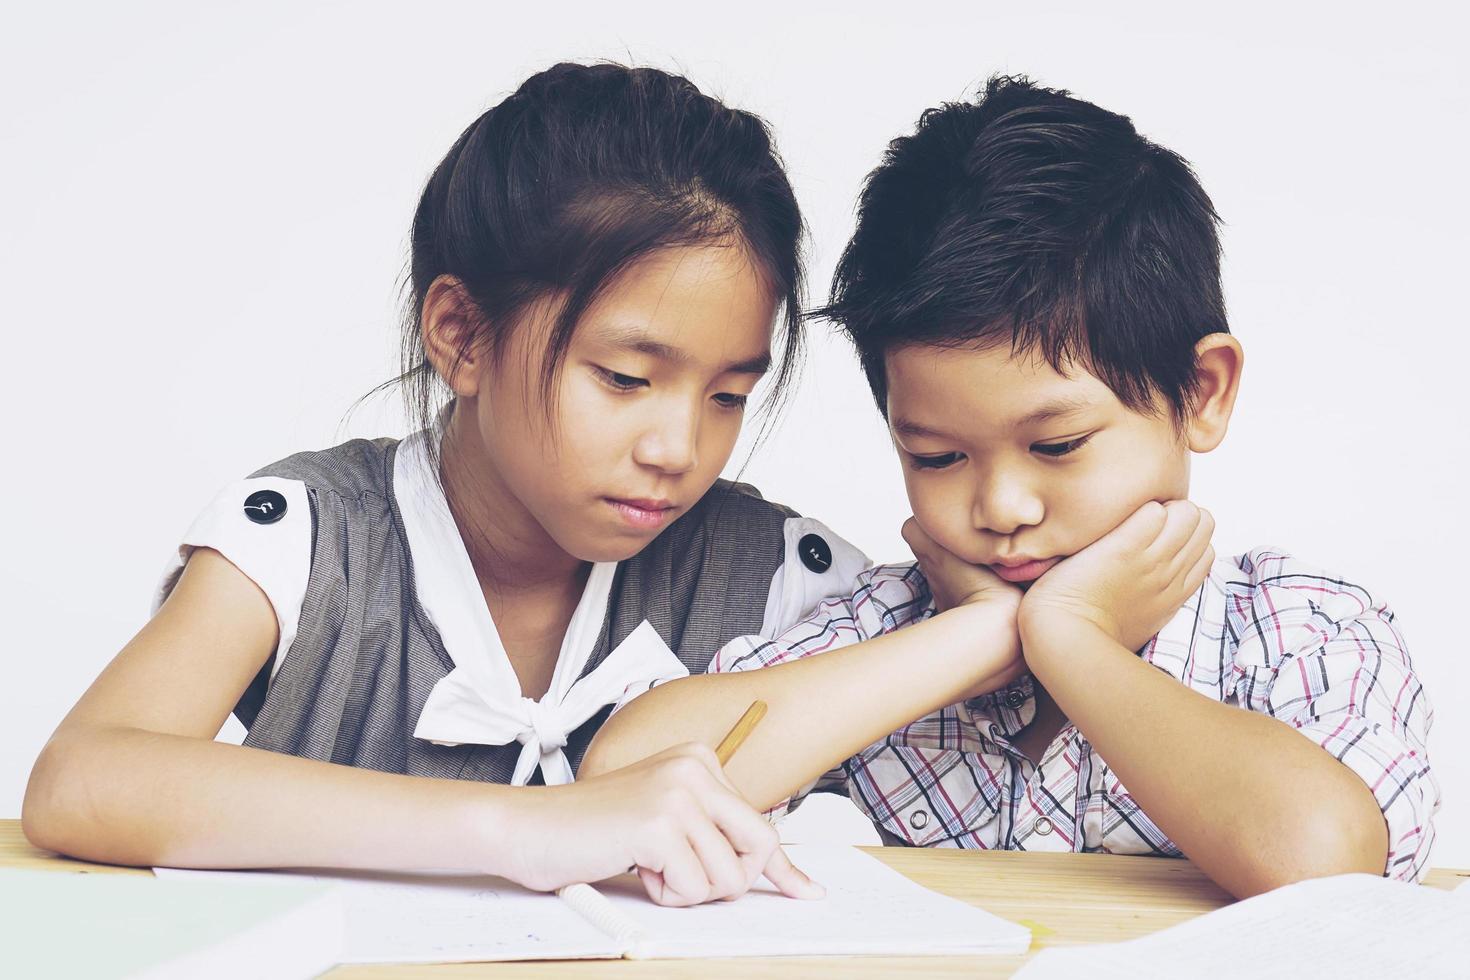 Sister try to teach her naughty younger brother to do homework  isolated over white background photo